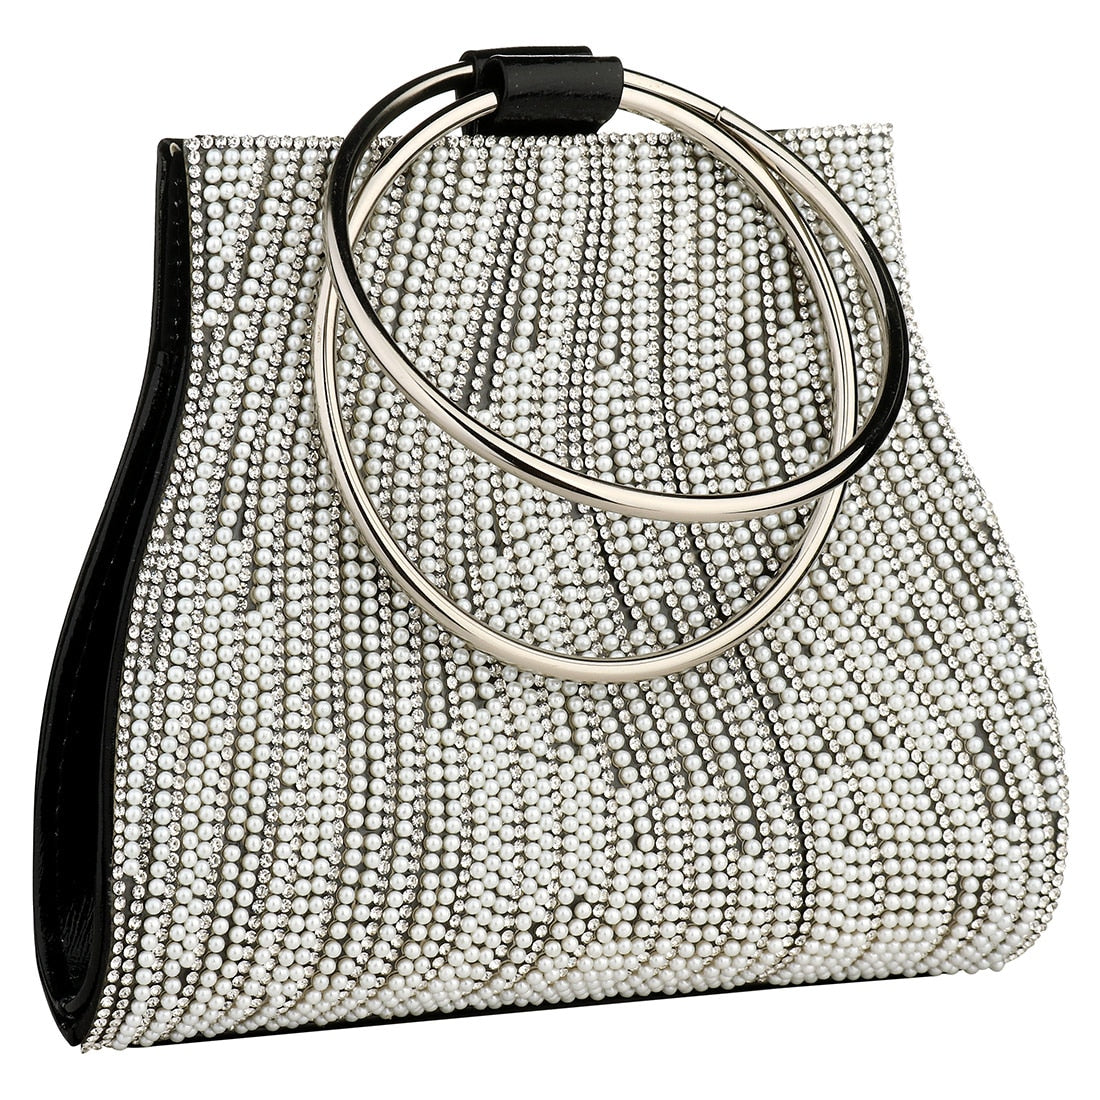 Maisie Rhinestone Clutch with Pearl Detailing